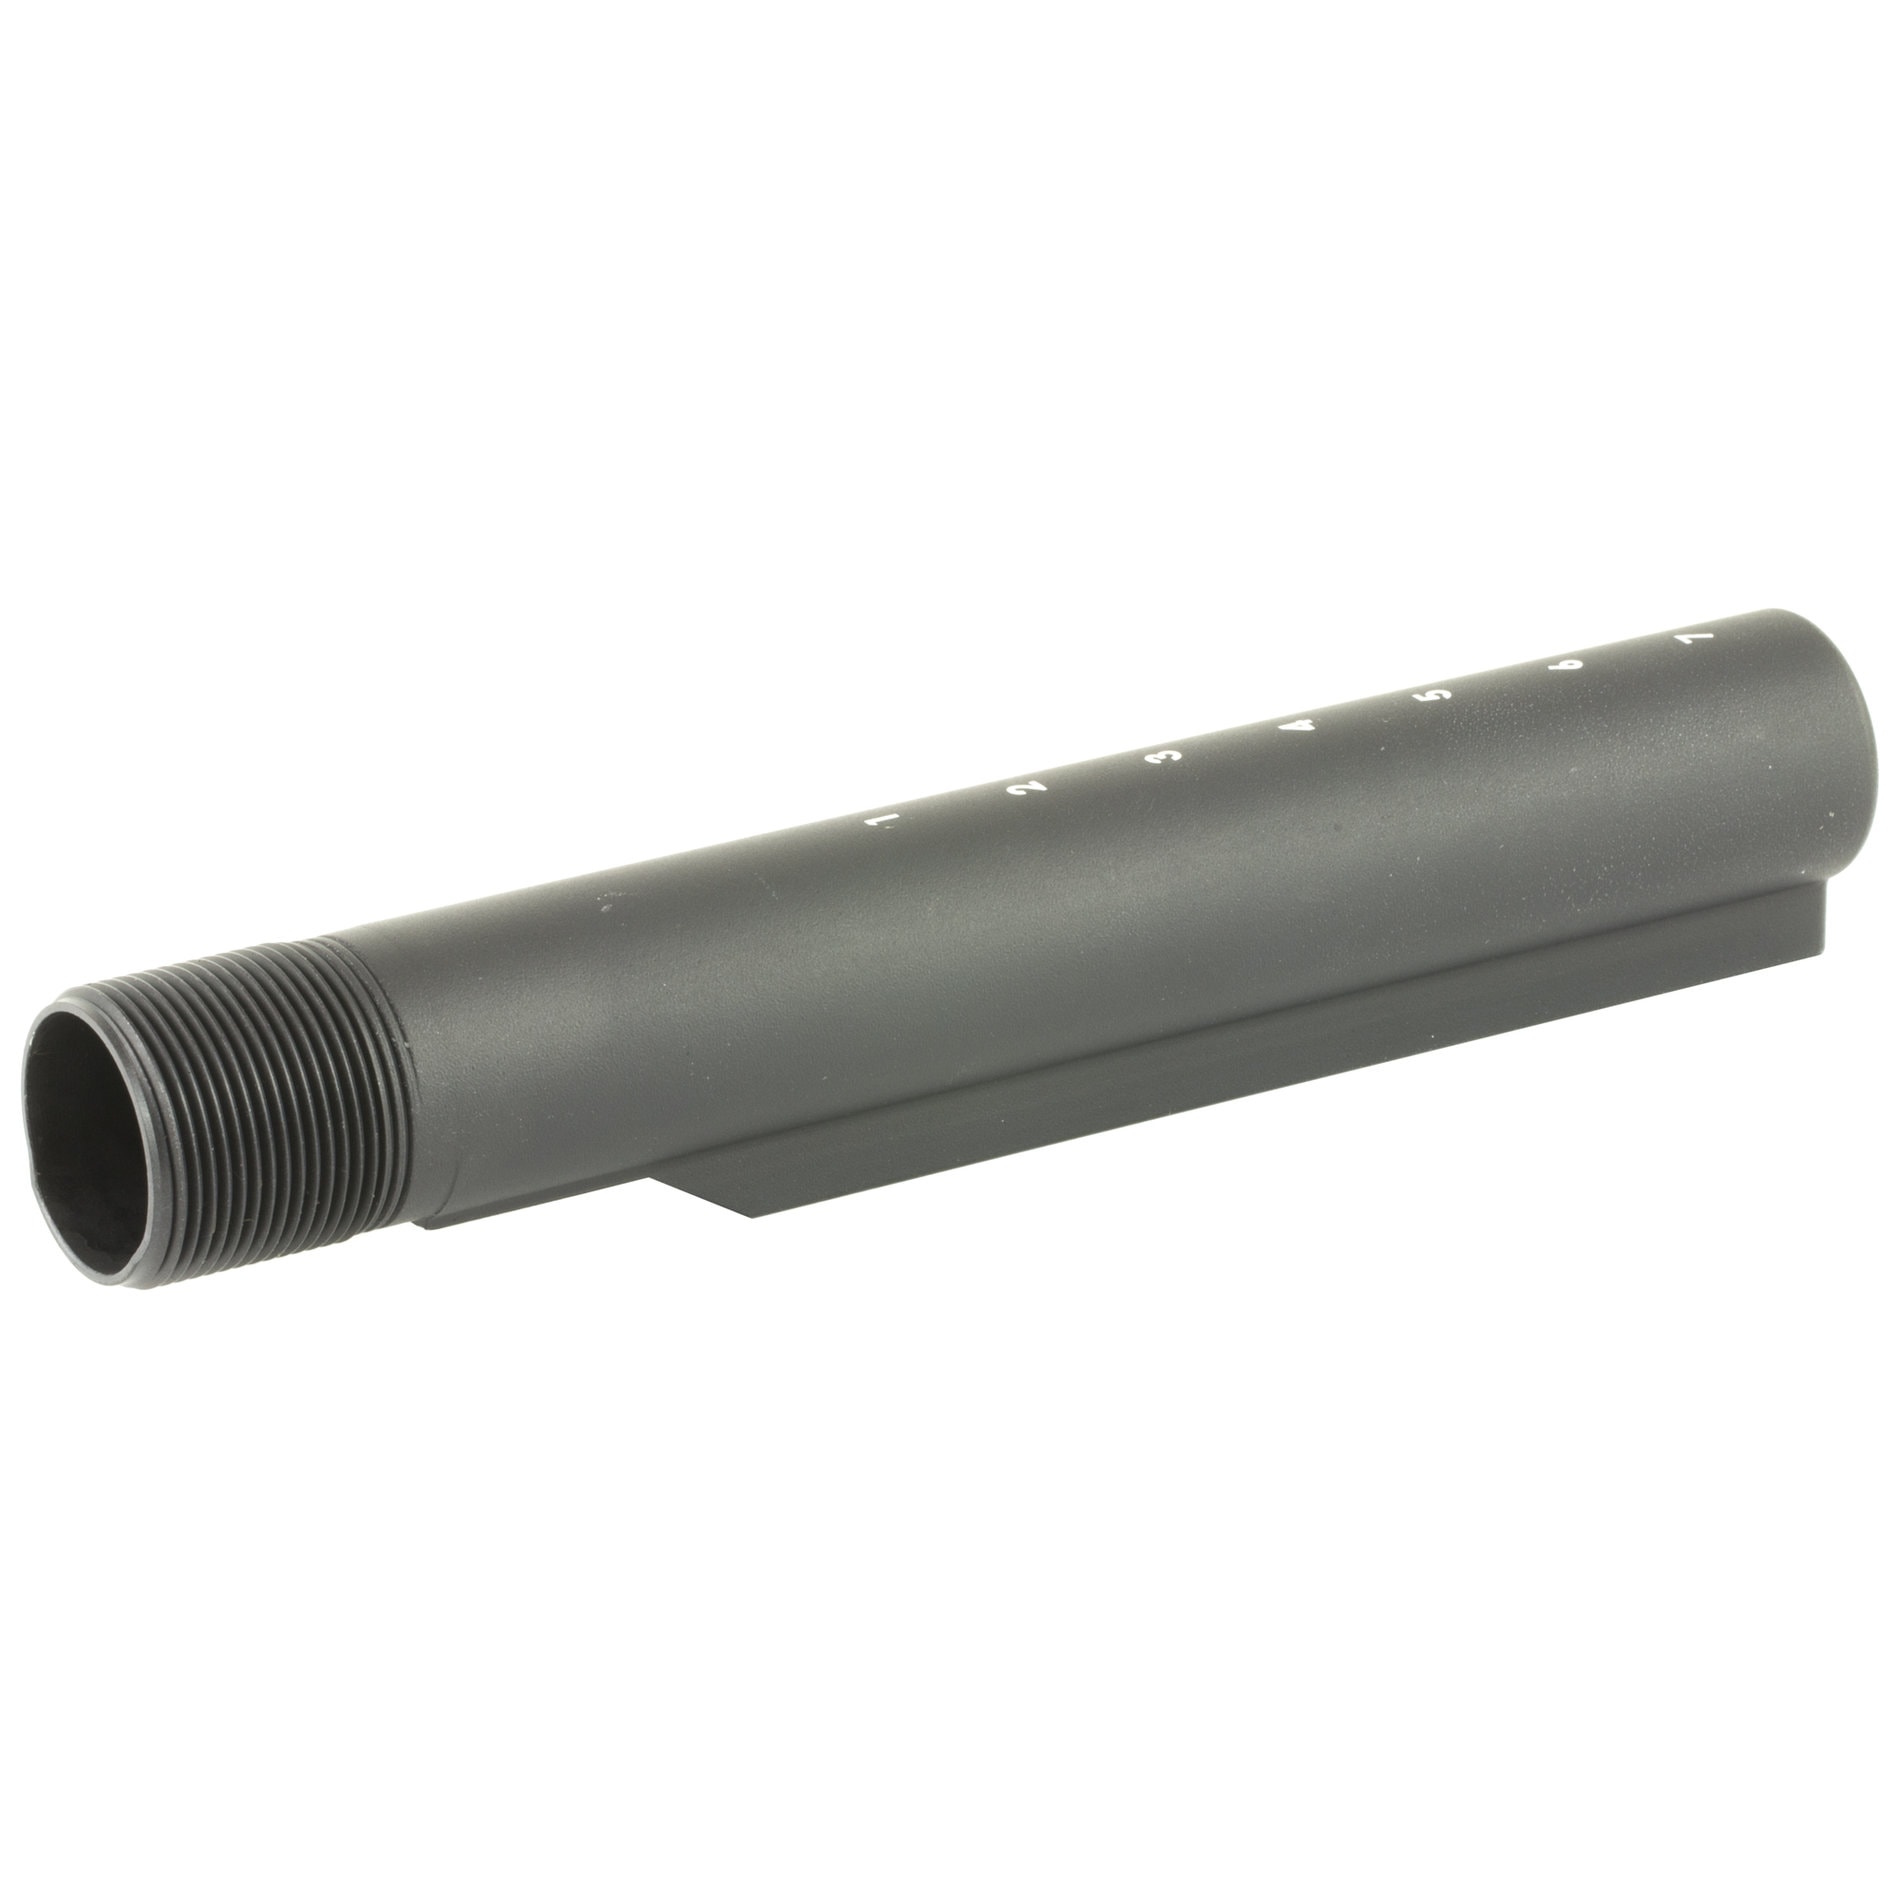 VLTOR A5 Receiver Extension Tube for AR-15 - AT3 Tactical